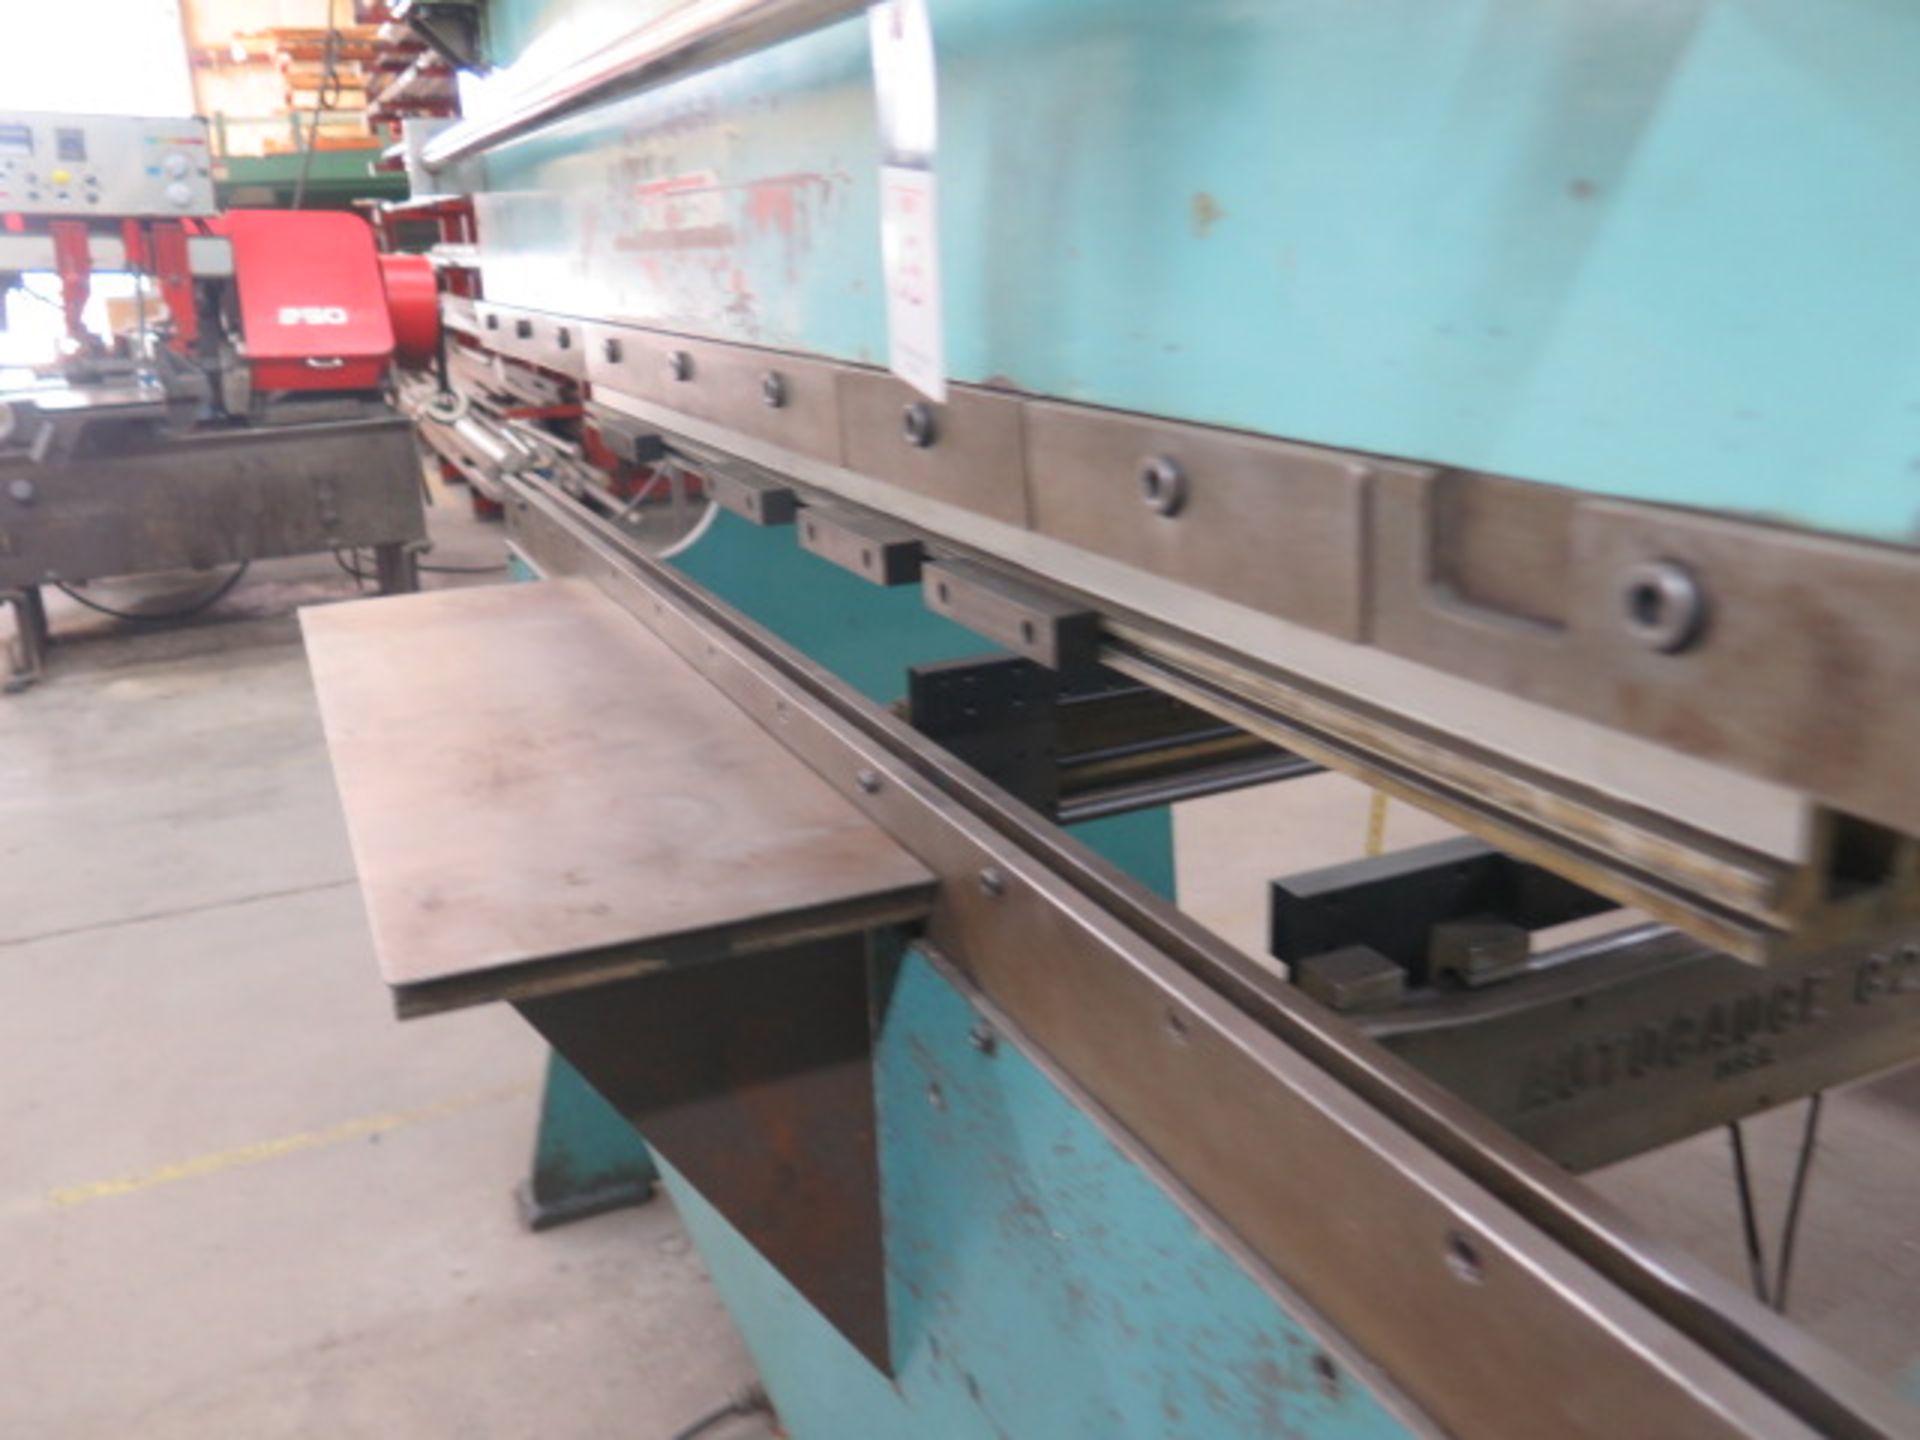 Wysong H-4072 40 Ton x 72” CNC Press Brake s/n HPB13-237 w/ Autogauge 524 Controls, SOLD AS IS - Image 4 of 15